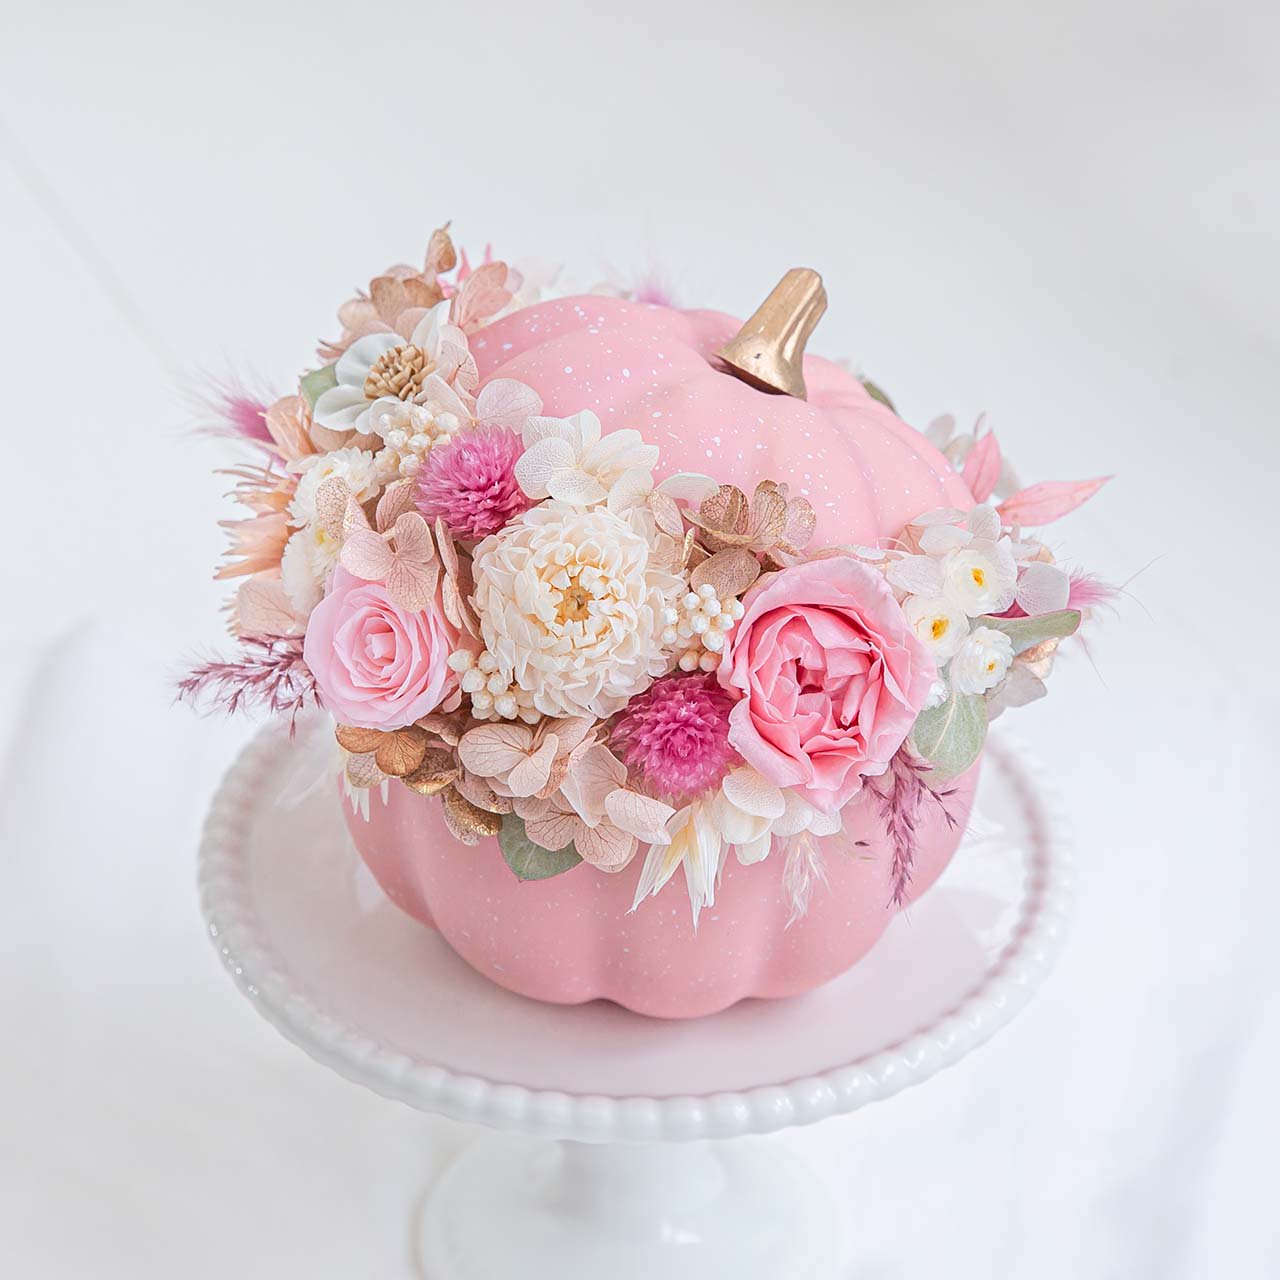 <img class='new_mark_img1' src='https://img.shop-pro.jp/img/new/icons14.gif' style='border:none;display:inline;margin:0px;padding:0px;width:auto;' />Pink Pumpkin（ピンクパンプキン）の画像